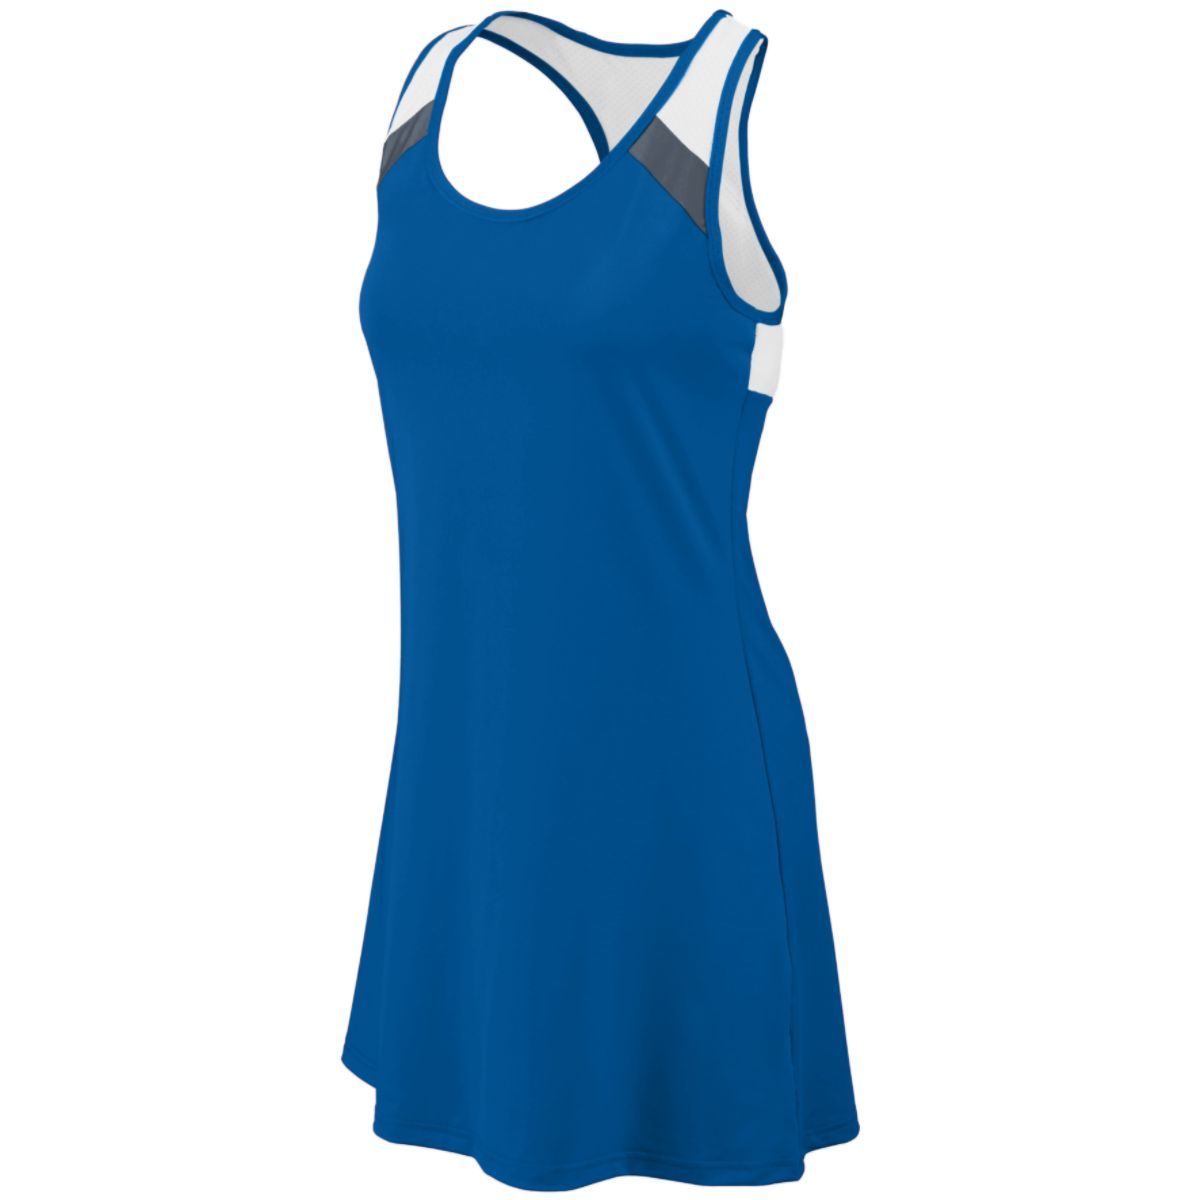 Augusta Sportswear Deuce Dress in Royal/Graphite/White  -Part of the Ladies, Augusta-Products, Tennis, Shirts product lines at KanaleyCreations.com